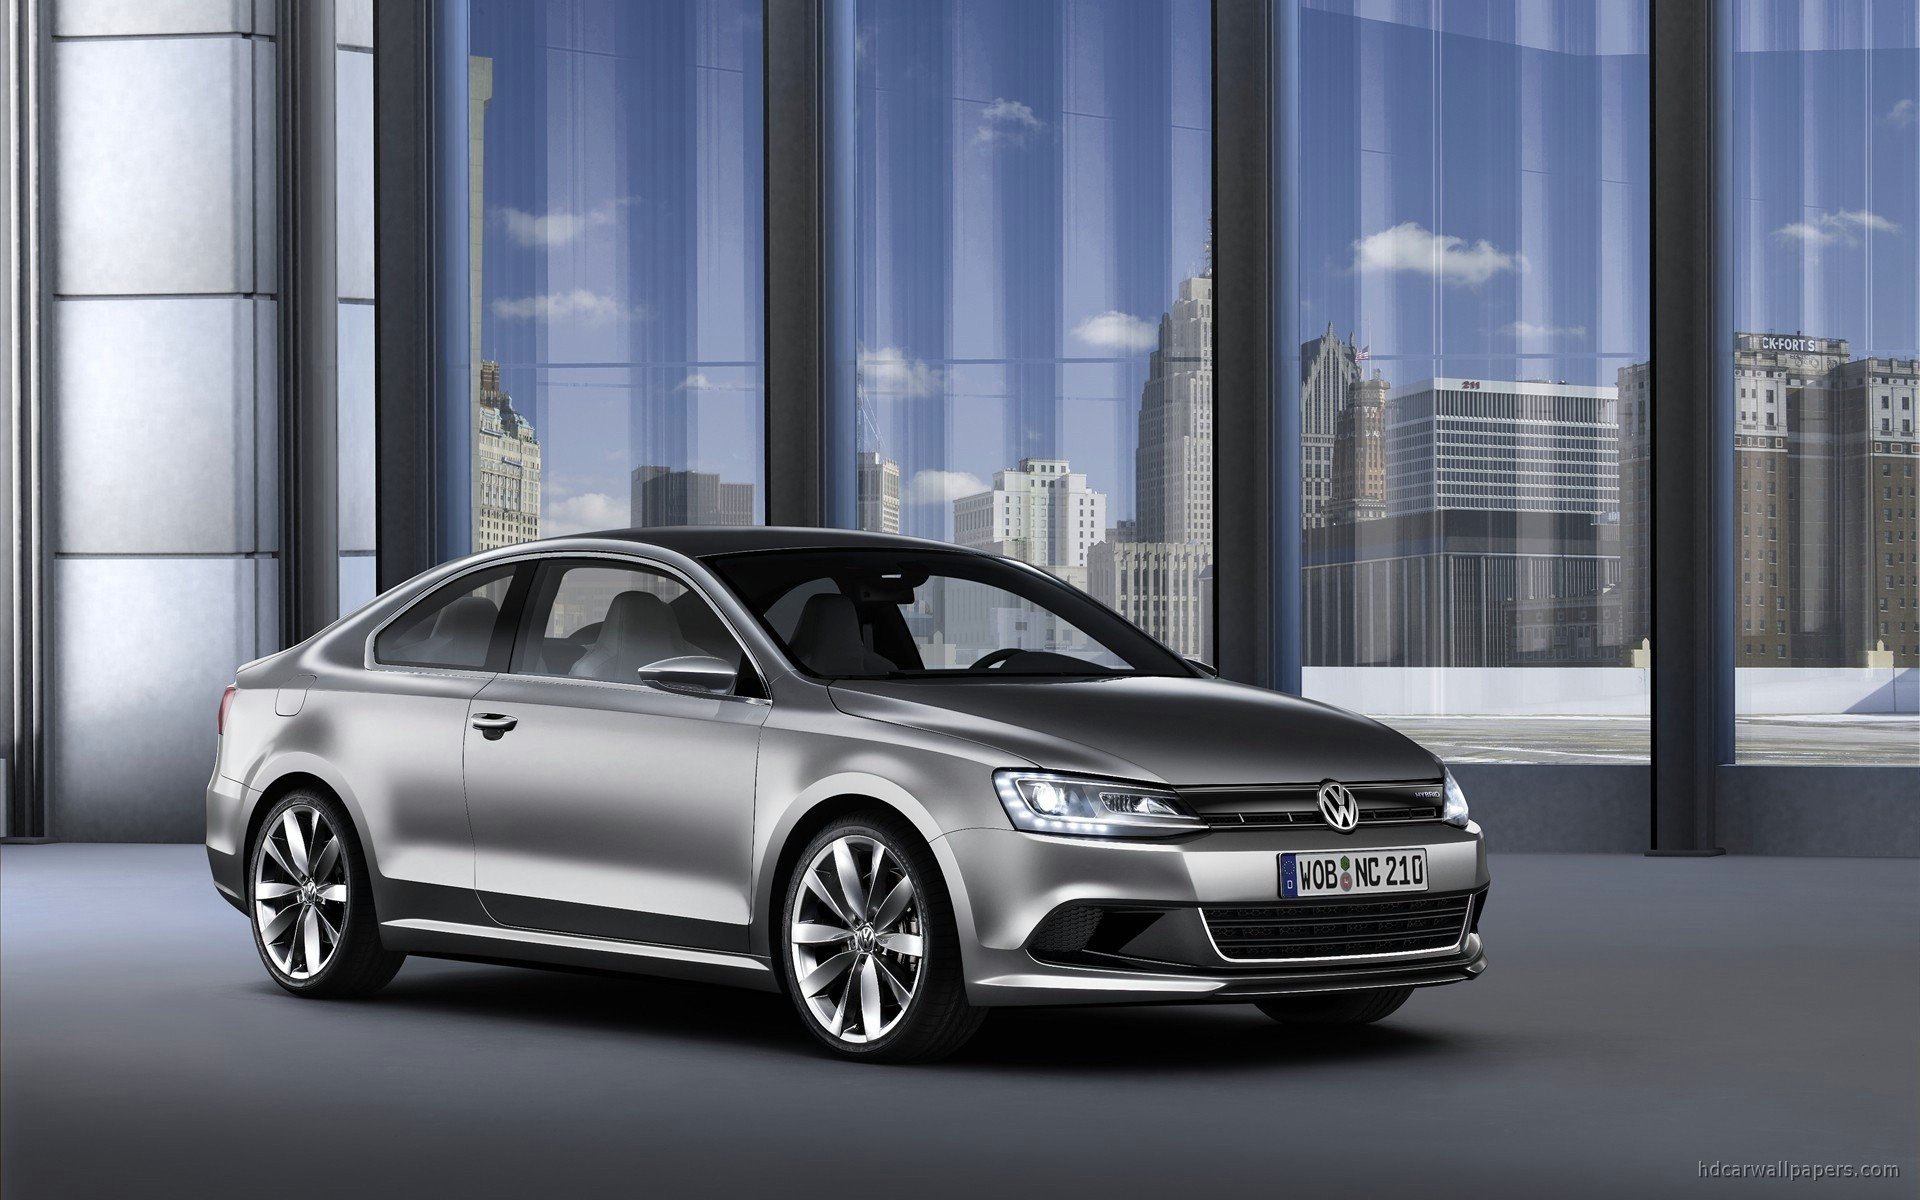 cars, Hybrid, Concept, Art, Vehicles, Volkswagen, Coupe, Compact Wallpaper